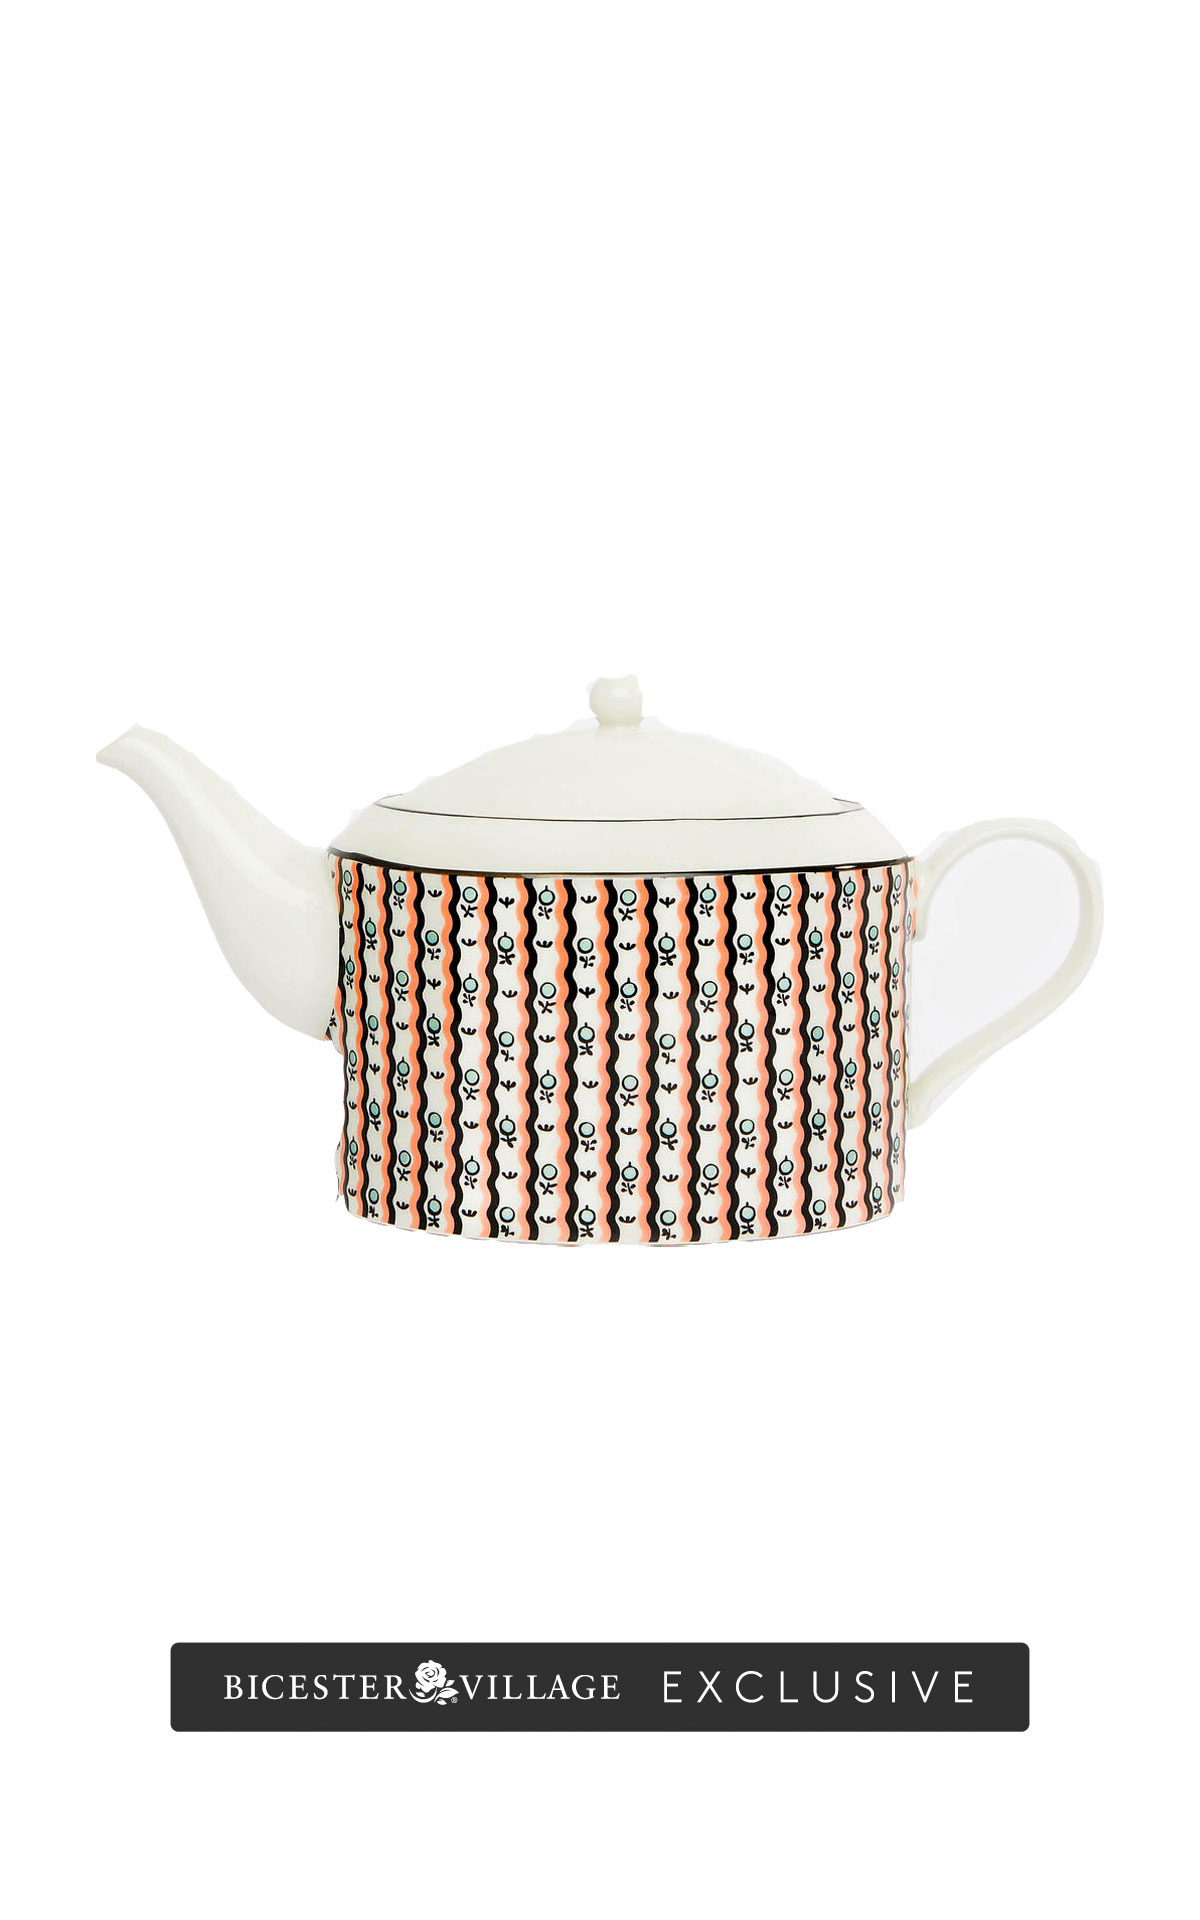 Soho Home Aida teapot from Bicester Village